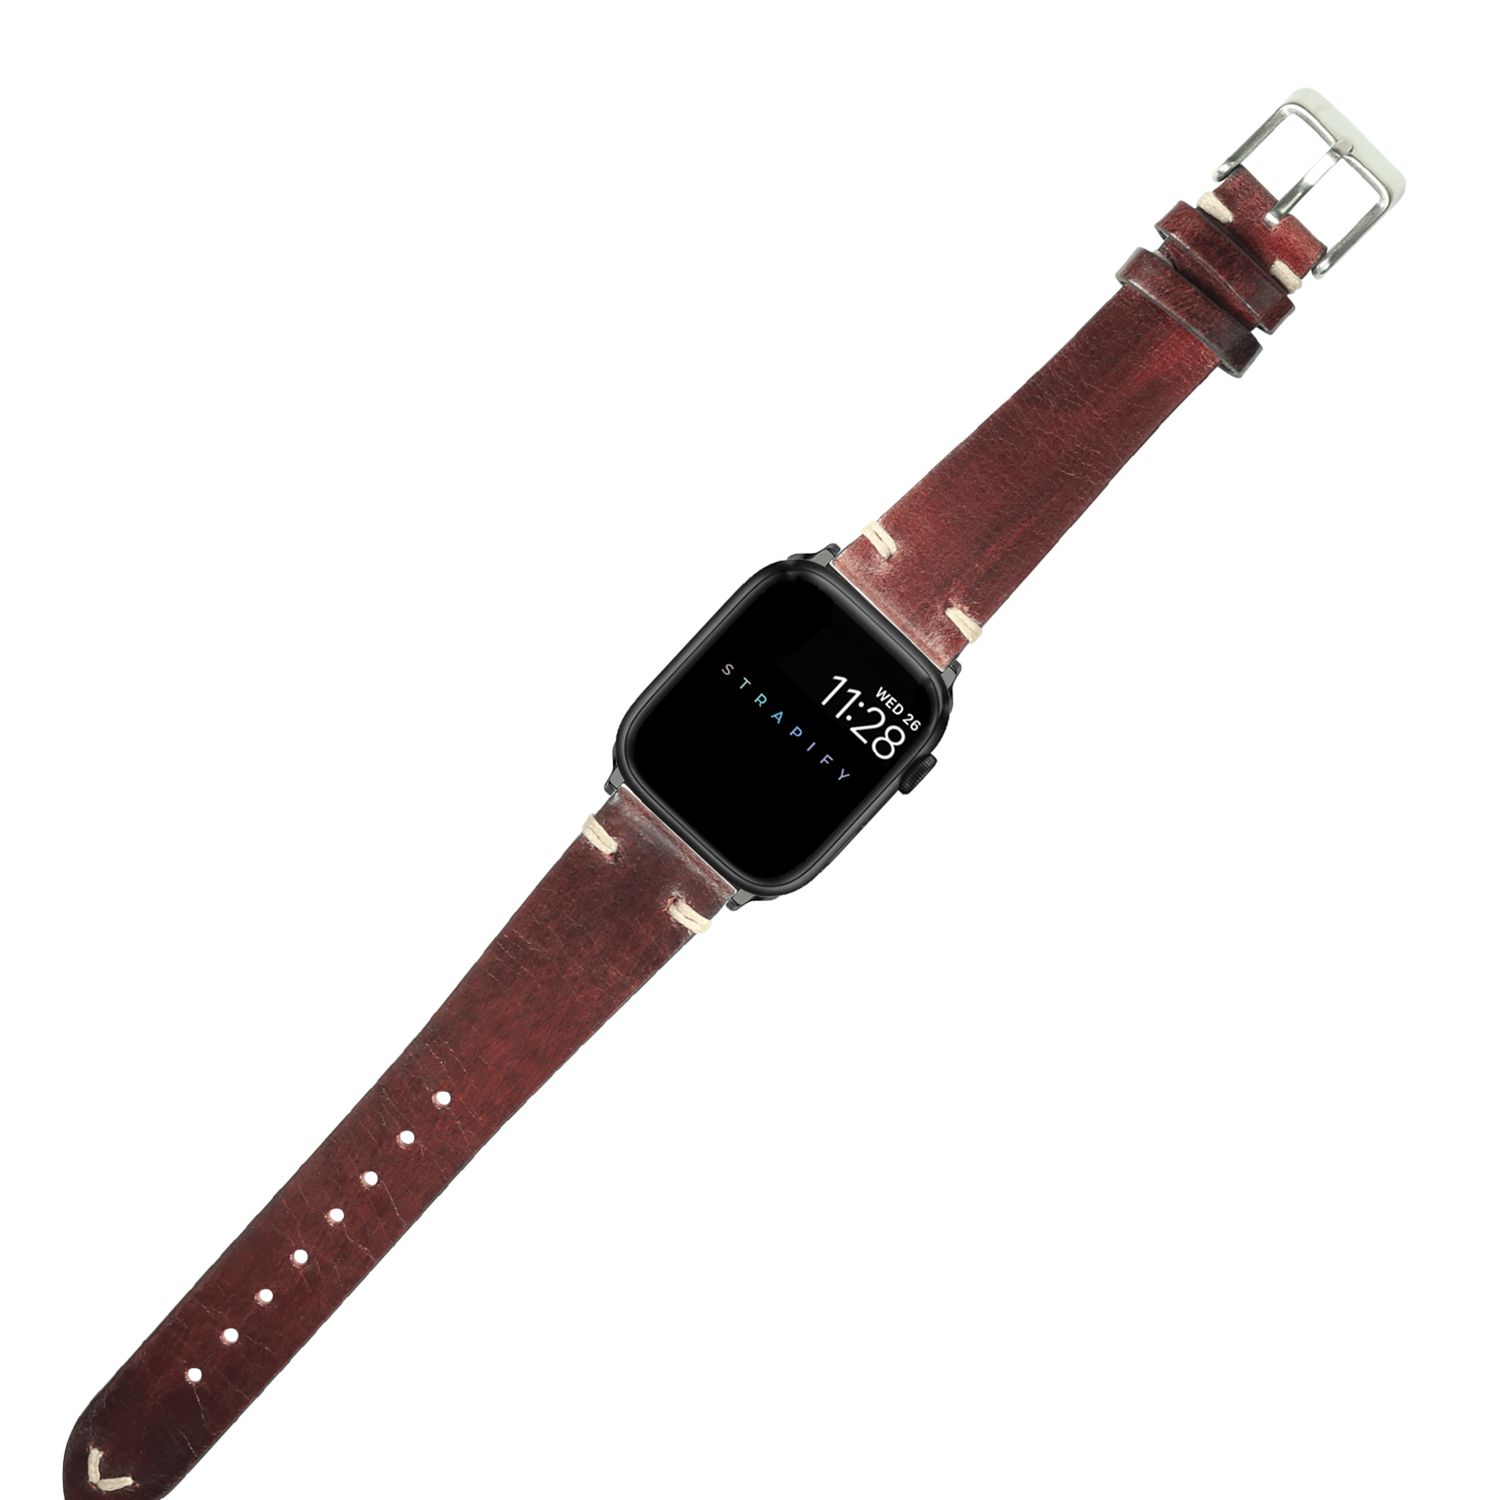 [Apple Watch] Vintage Knotted Leather - Smoked Dark Brown